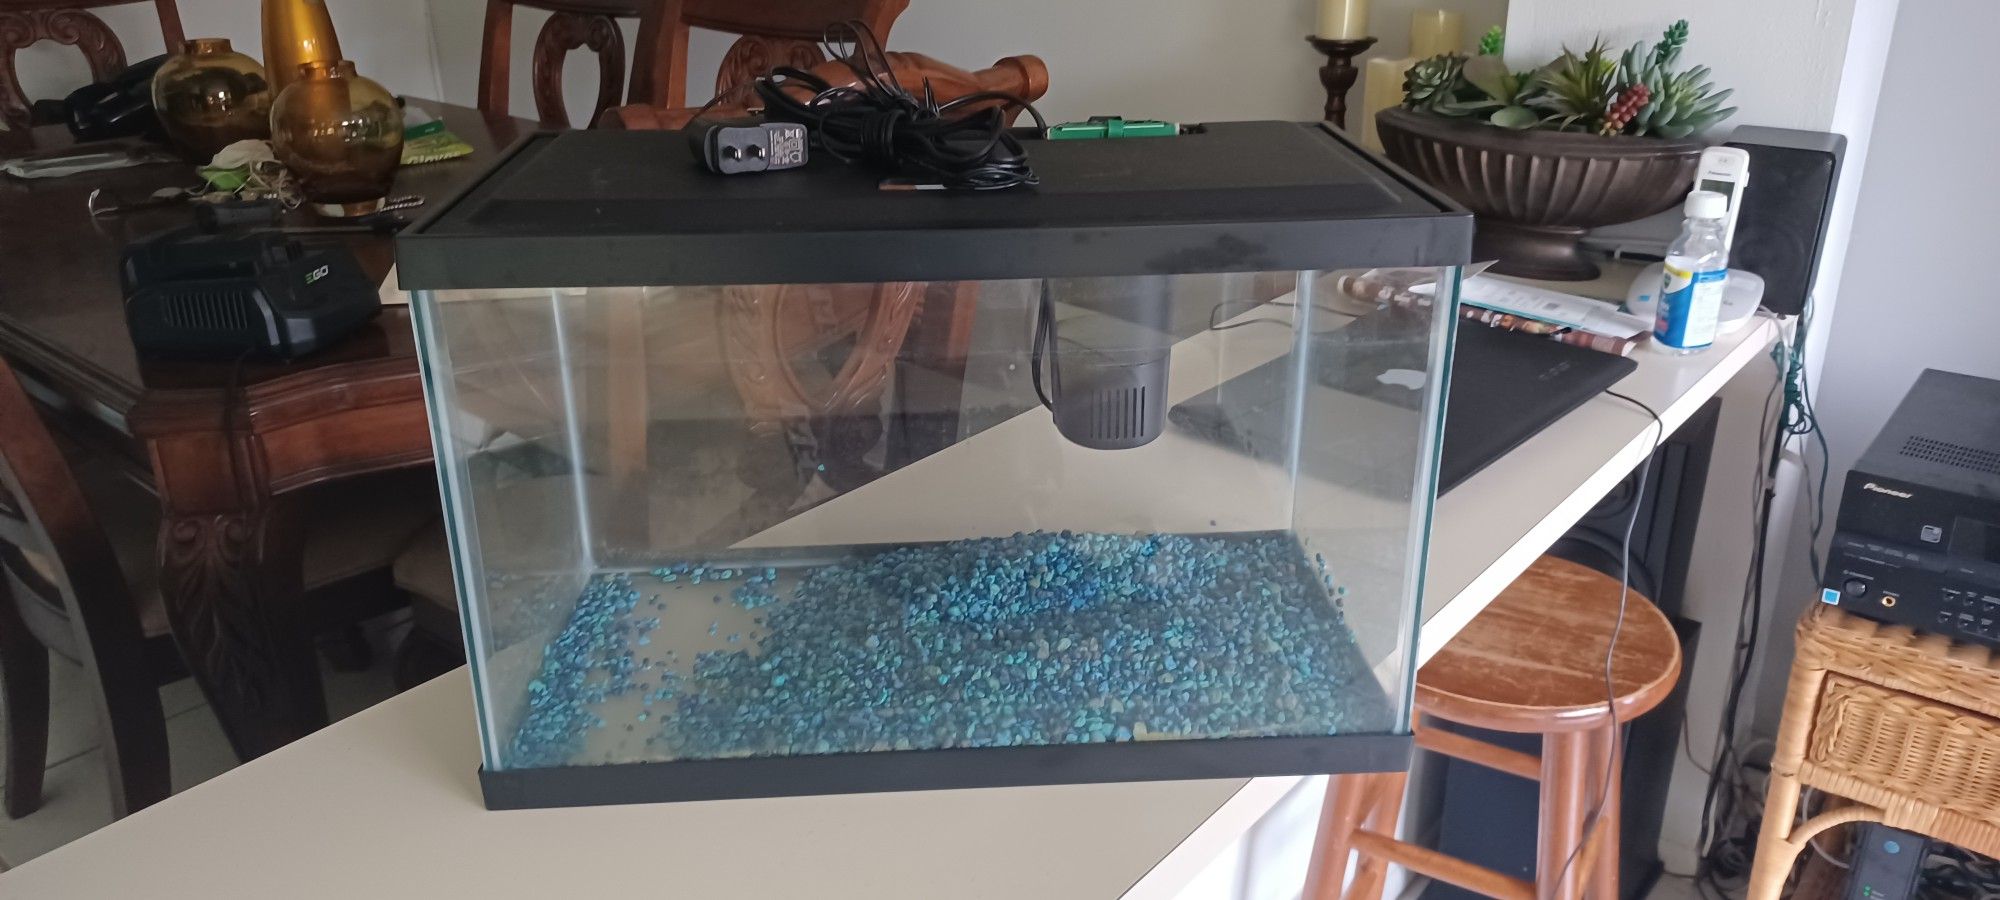 10 gallon fish tank with lights and filter and lid